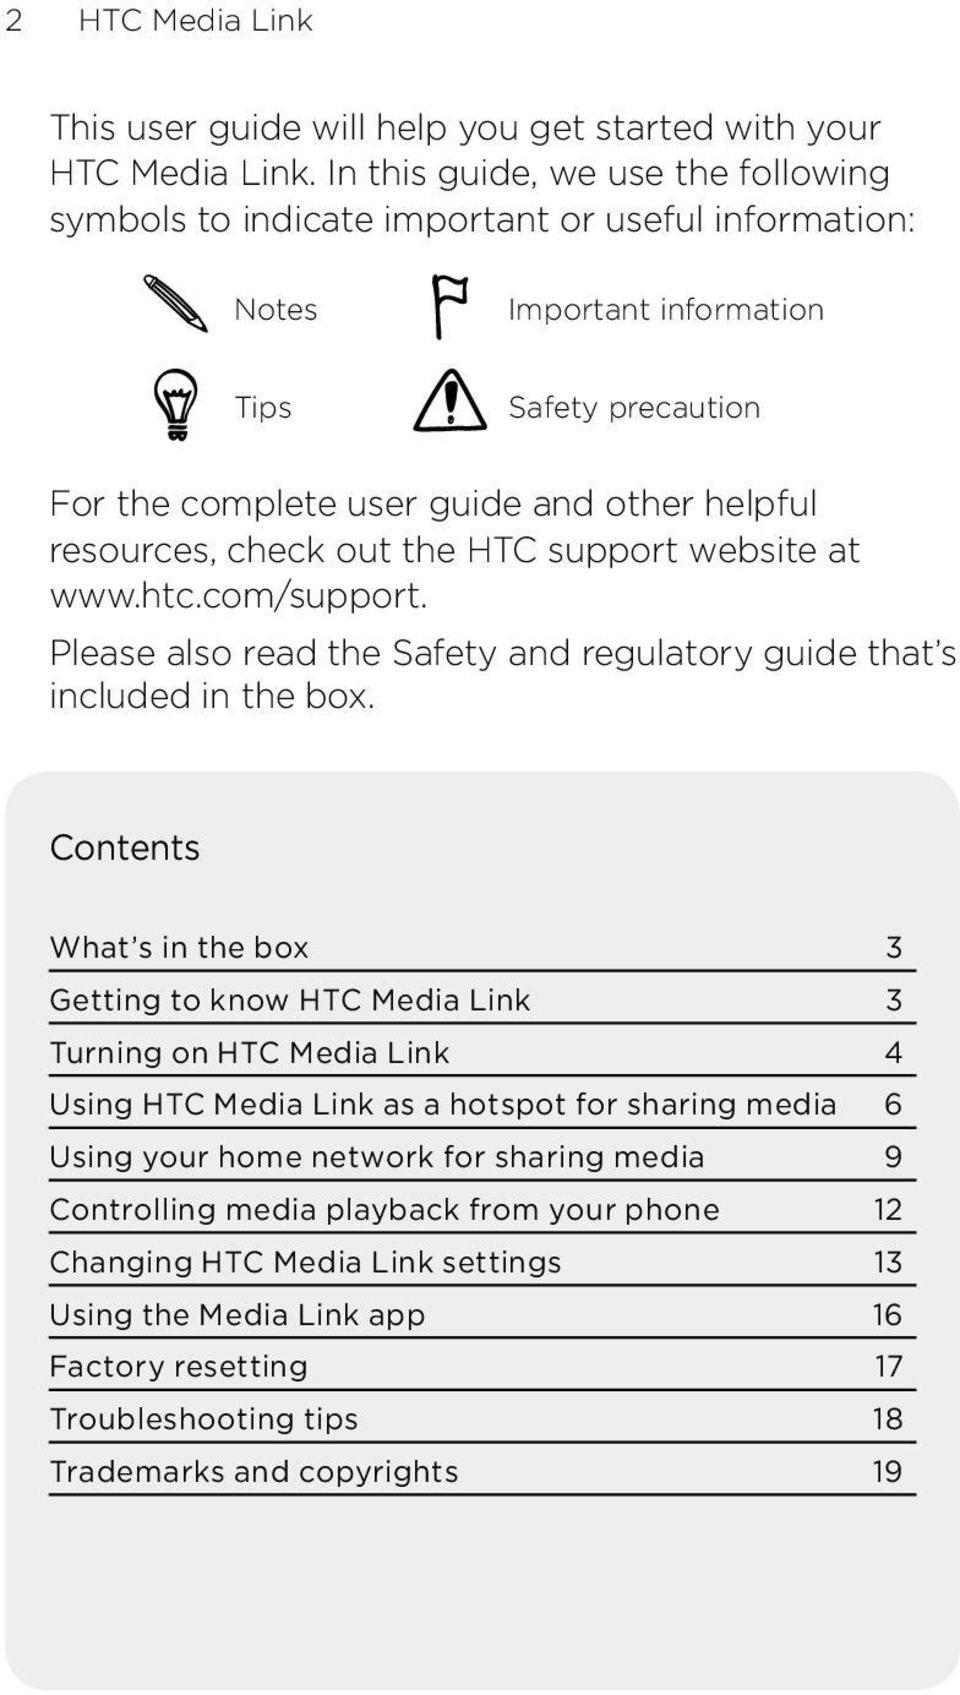 check out the HTC support website at www.htc.com/support. Please also read the Safety and regulatory guide that s included in the box.